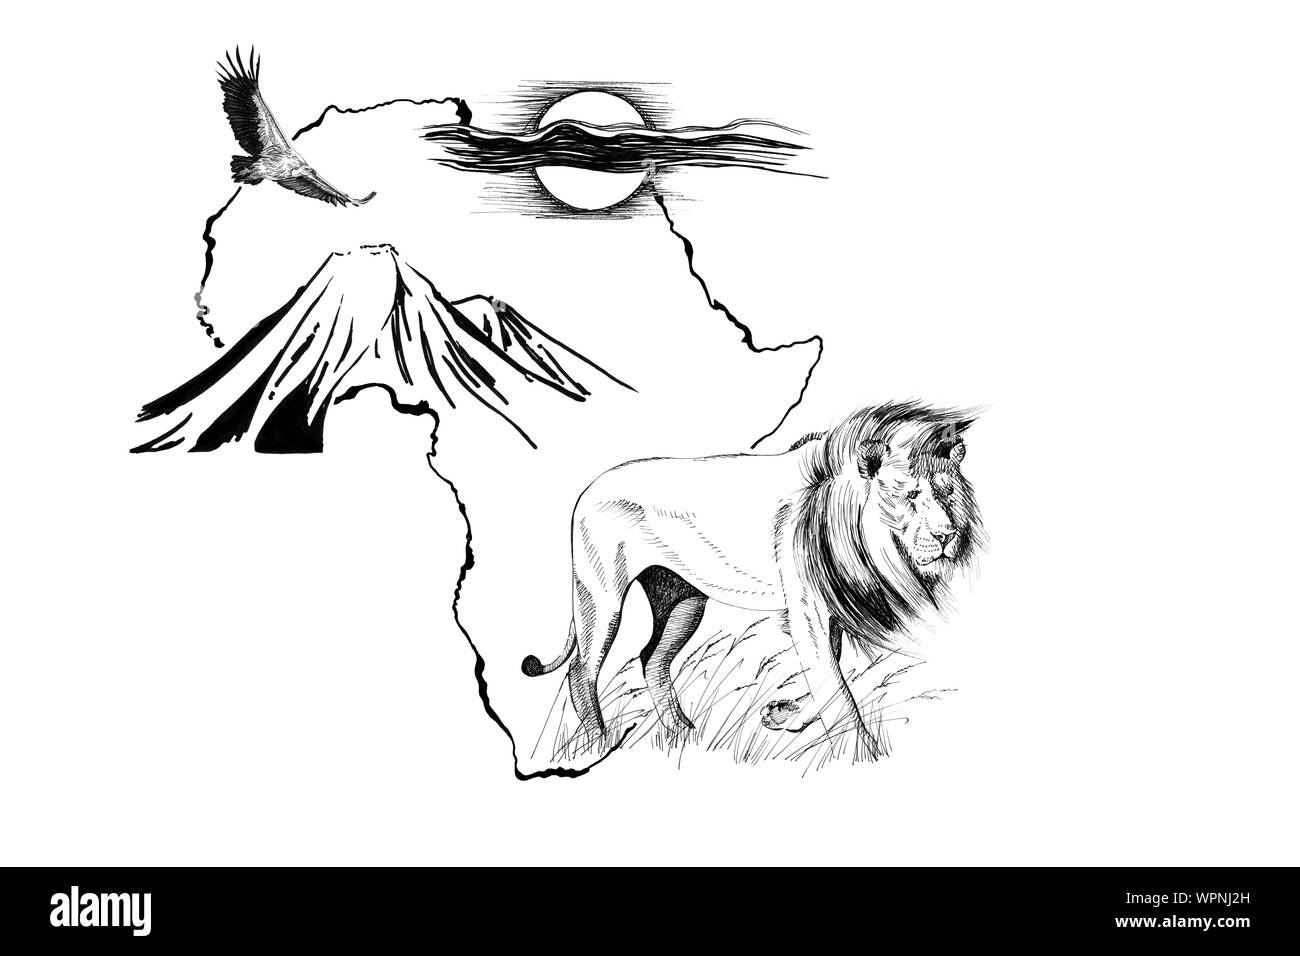 Lion on Africa map background with Kilimanjaro mountain, vulture and sun. Collection of hand drawn illustrations (originals, no tracing) Stock Photo